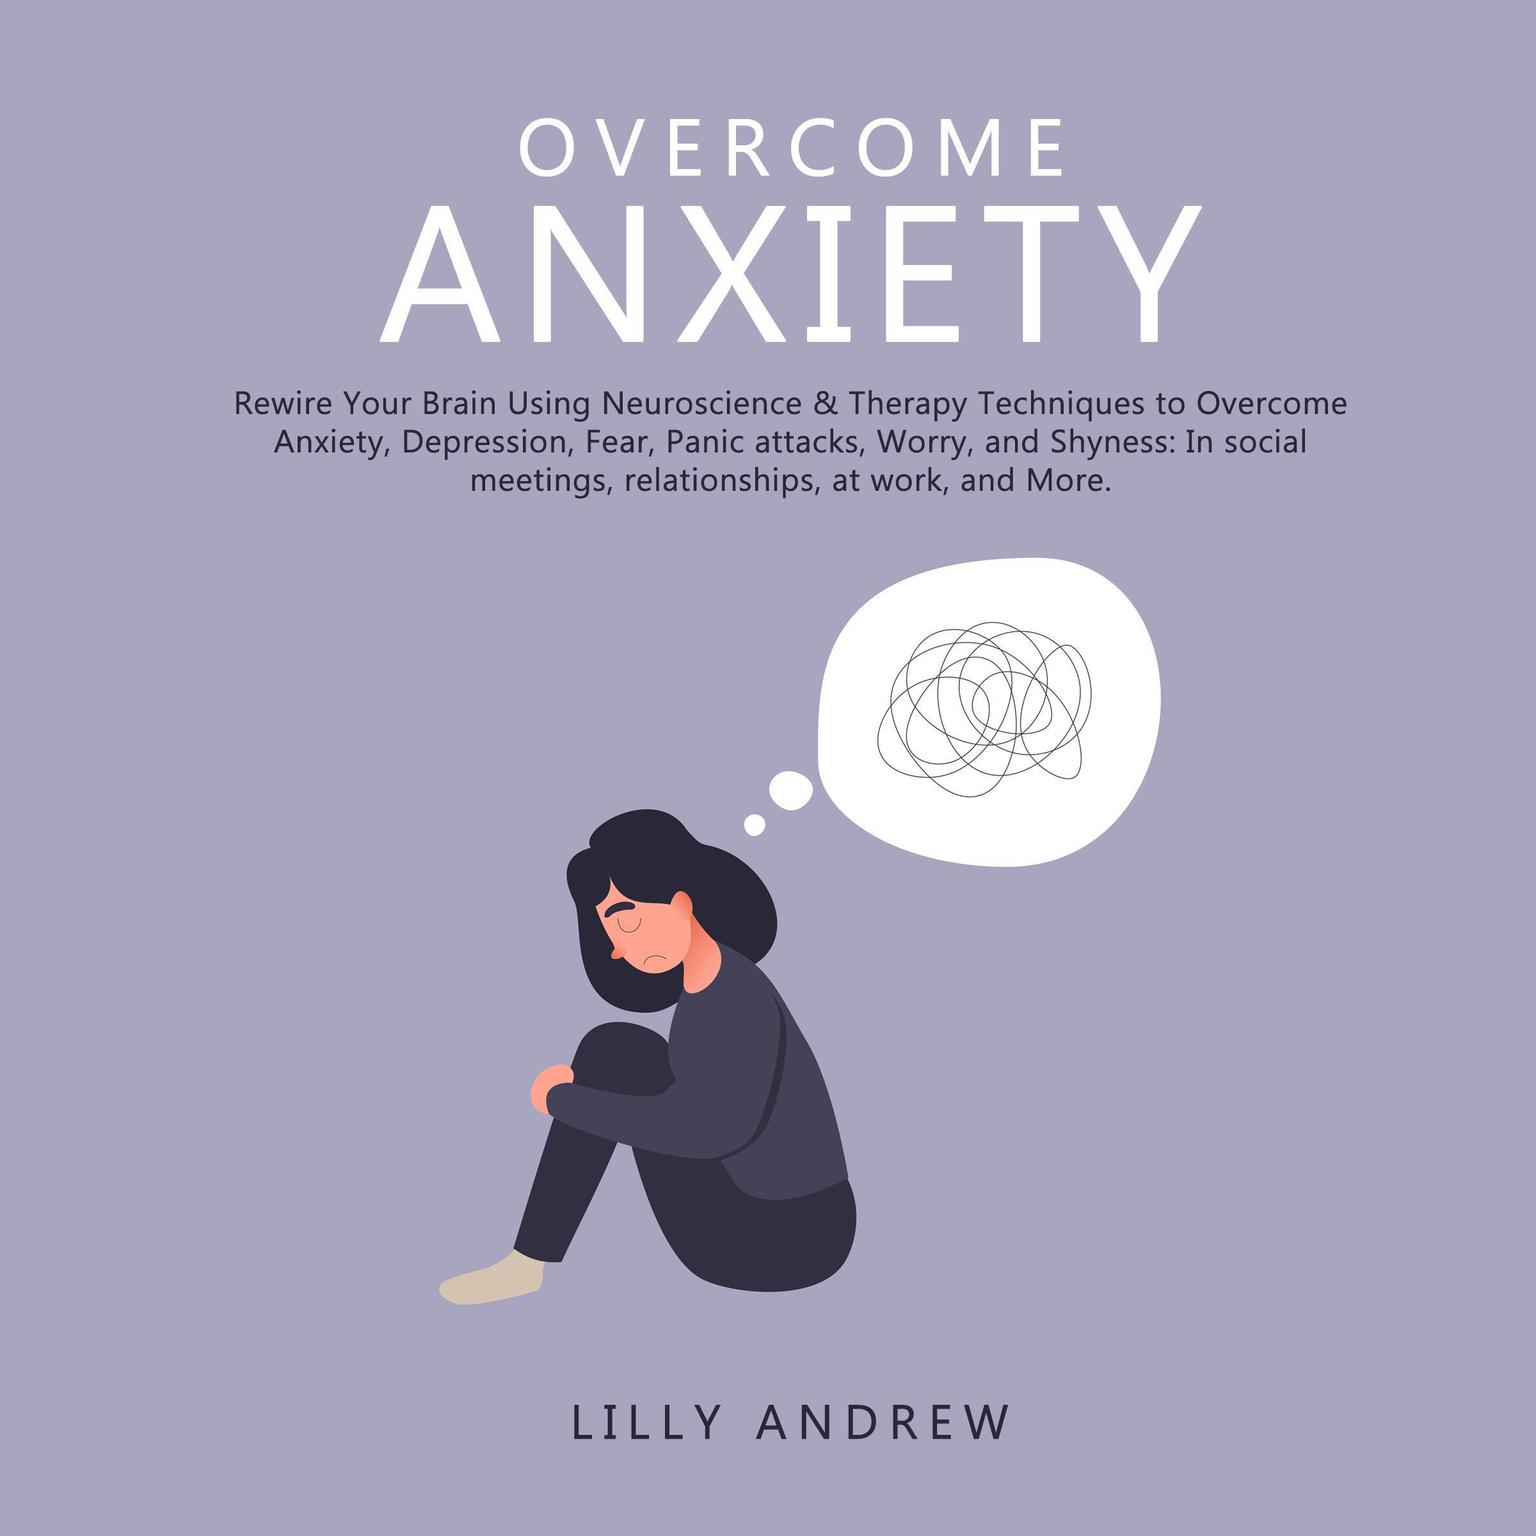 Overcome Anxiety: Rewire Your Brain Using Neuroscience & Therapy Techniques to Overcome Anxiety, Depression, Fear, Panic Attacks, Worry, and Shyness: In Social Meetings, Relationships, at Work, and More Audiobook, by Lilly Andrew